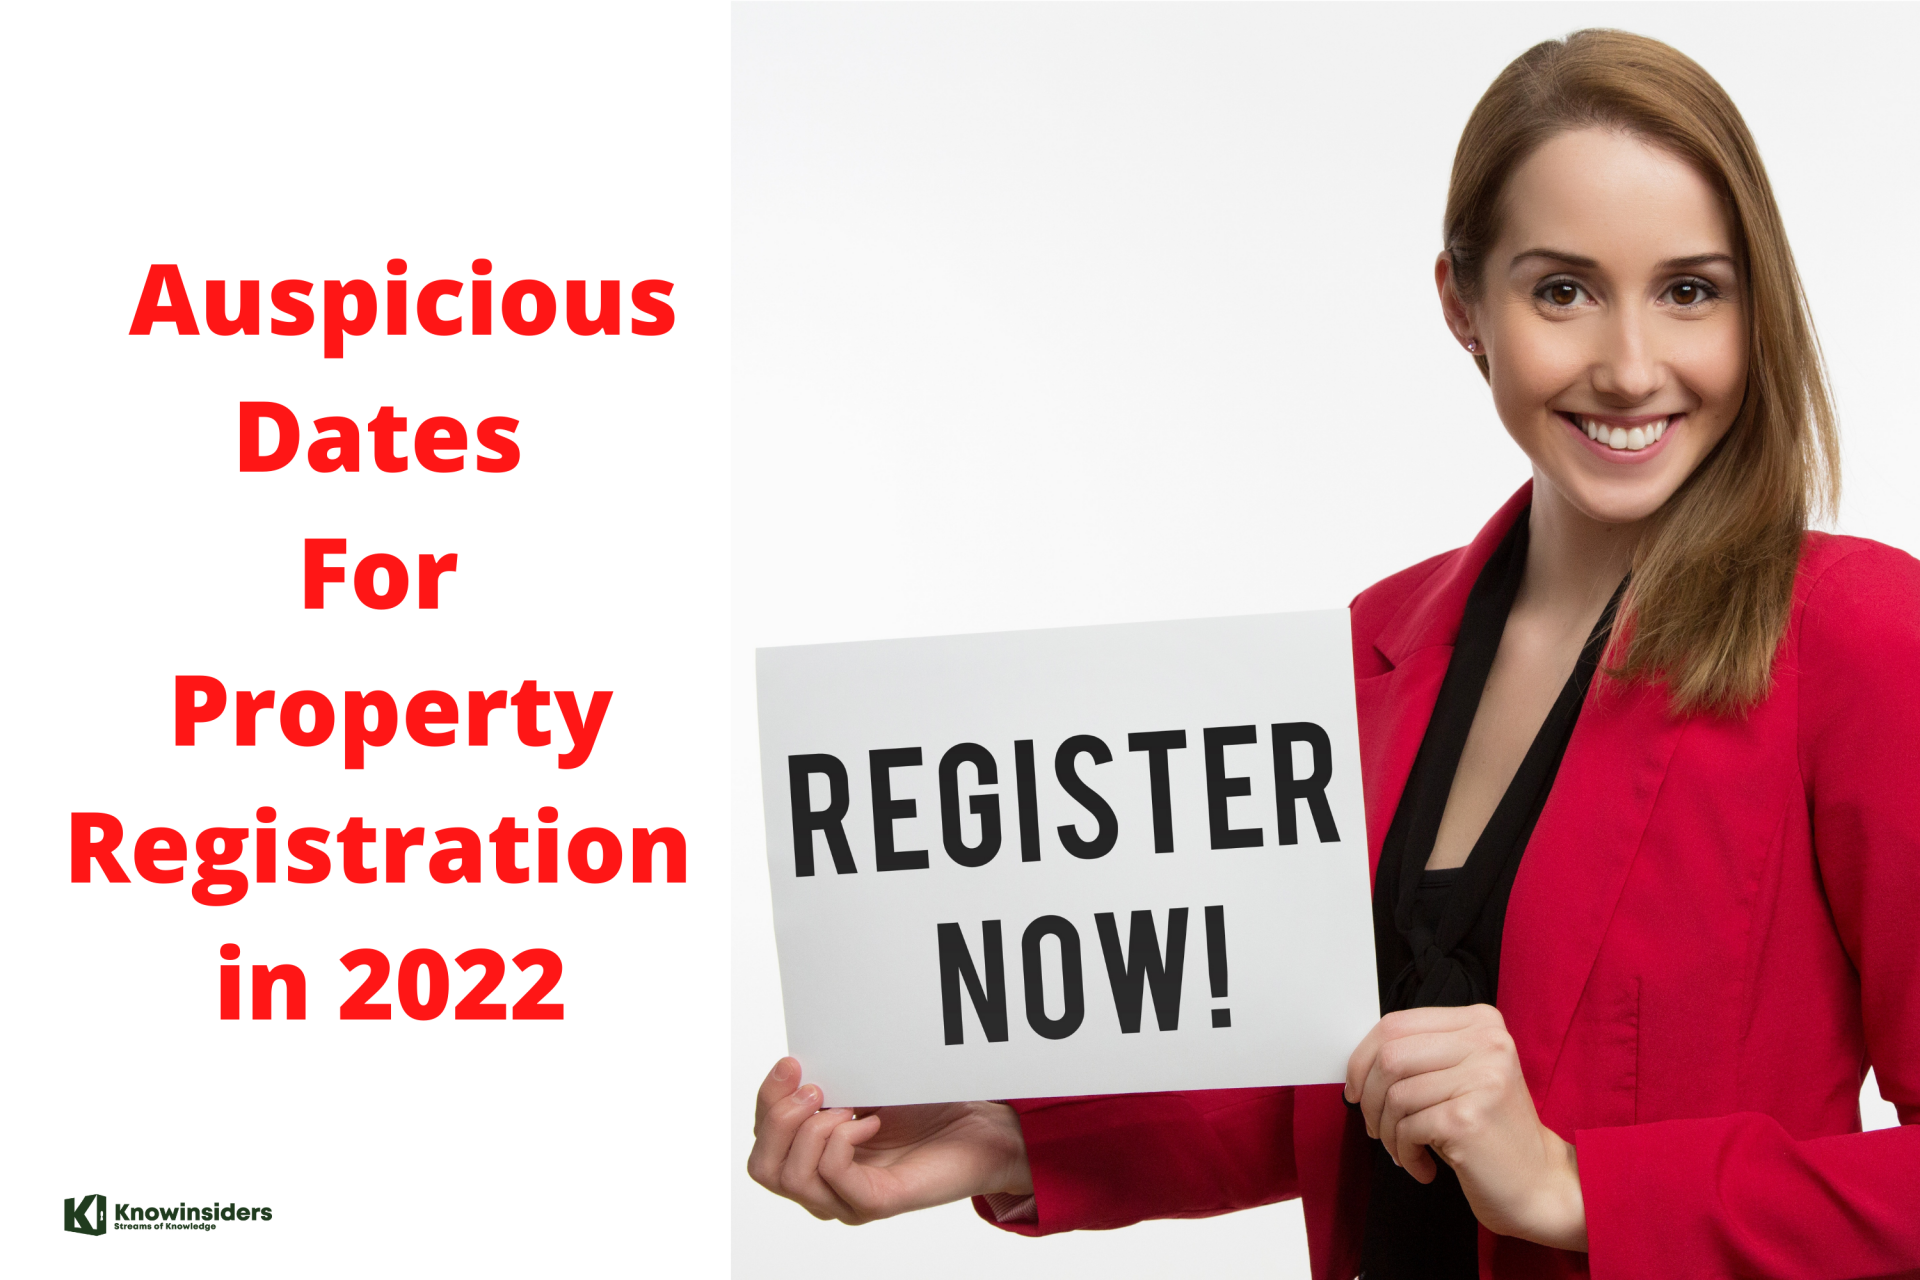 Top Auspicious Dates For Property Registration In 2022